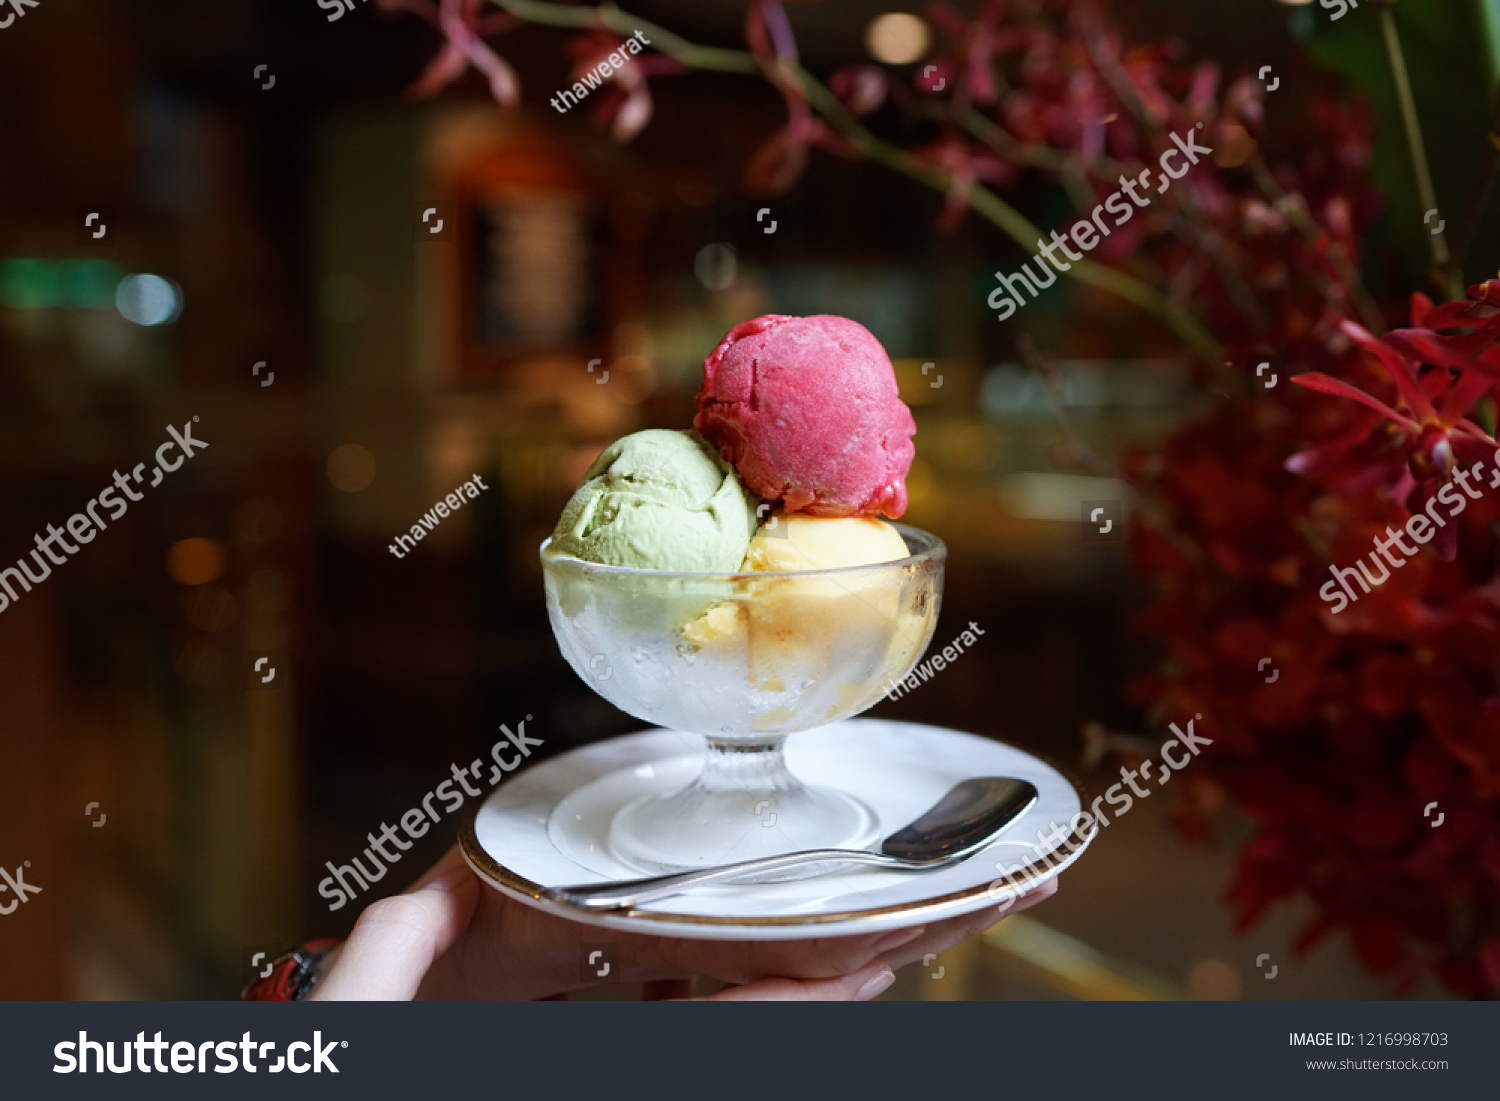 A bowl of ice cream scoops of various flavored, including raspberry, mango and matcha green tea flavours on blurred background. #1216998703